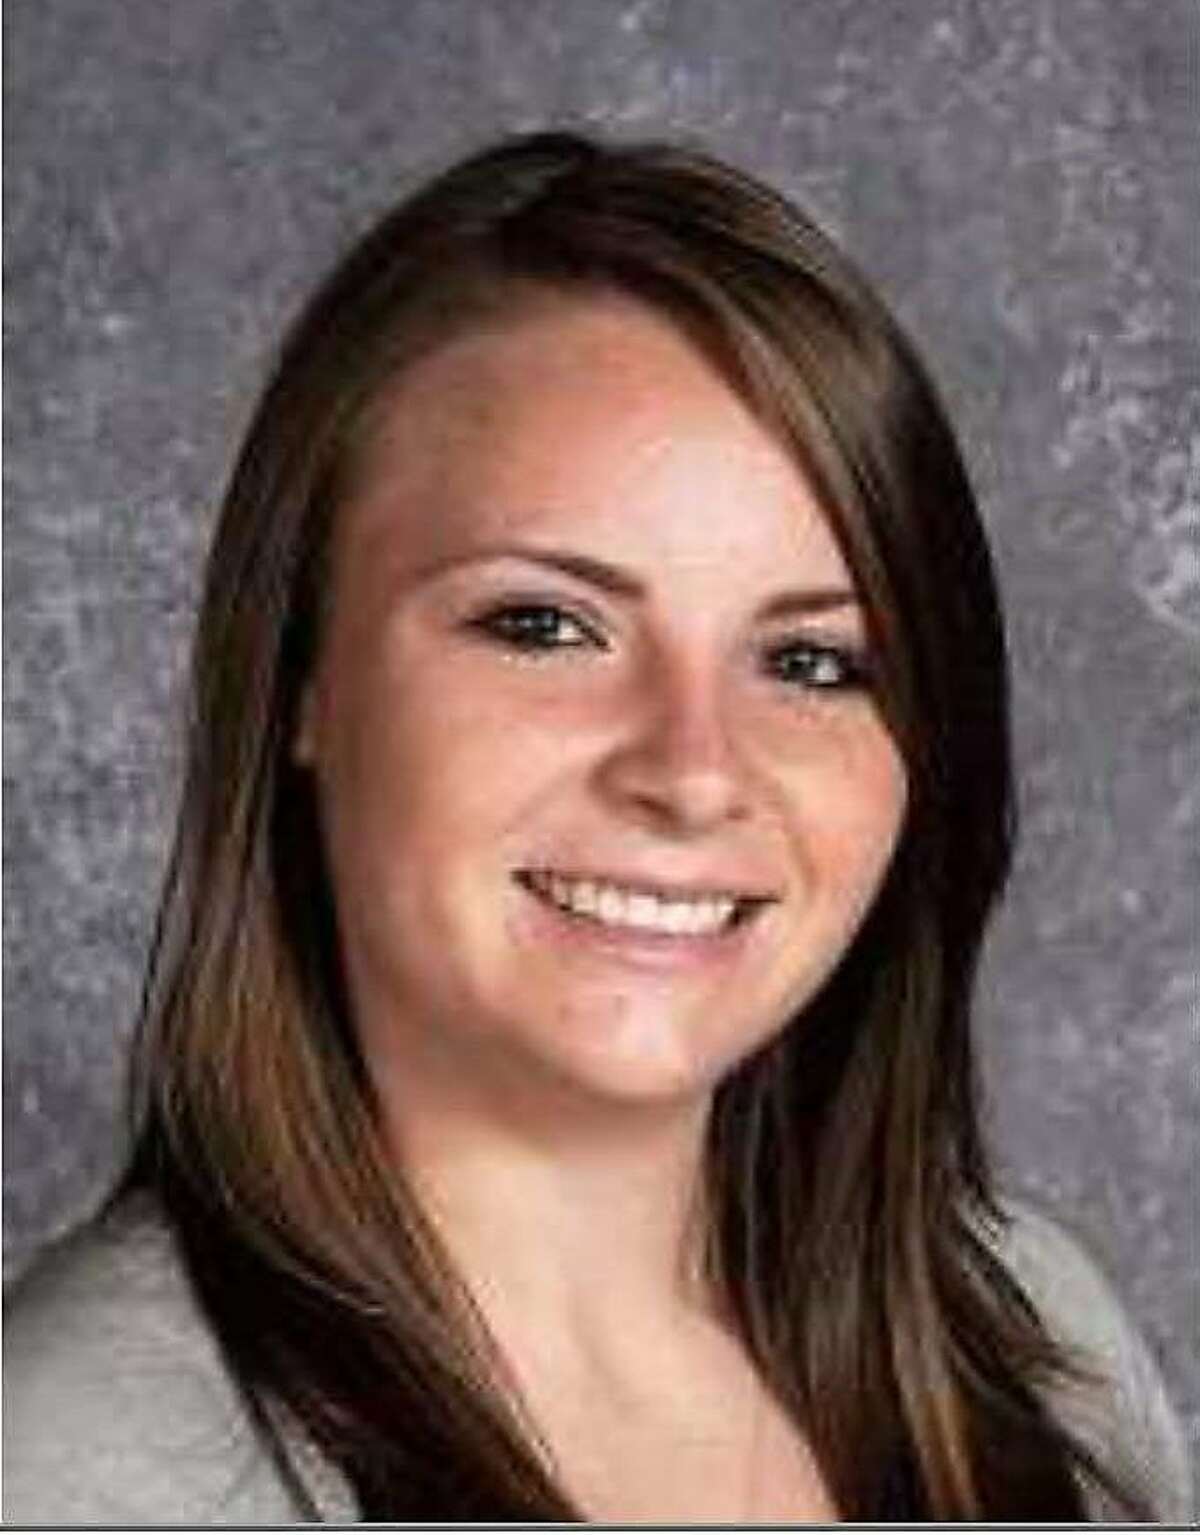 A yearbook photo from Rancho Cotate High School in Rohnert Park shows Ashley Donohoe, who died June 16, 2015 in a balcony collapse in Berkeley. She was 22.